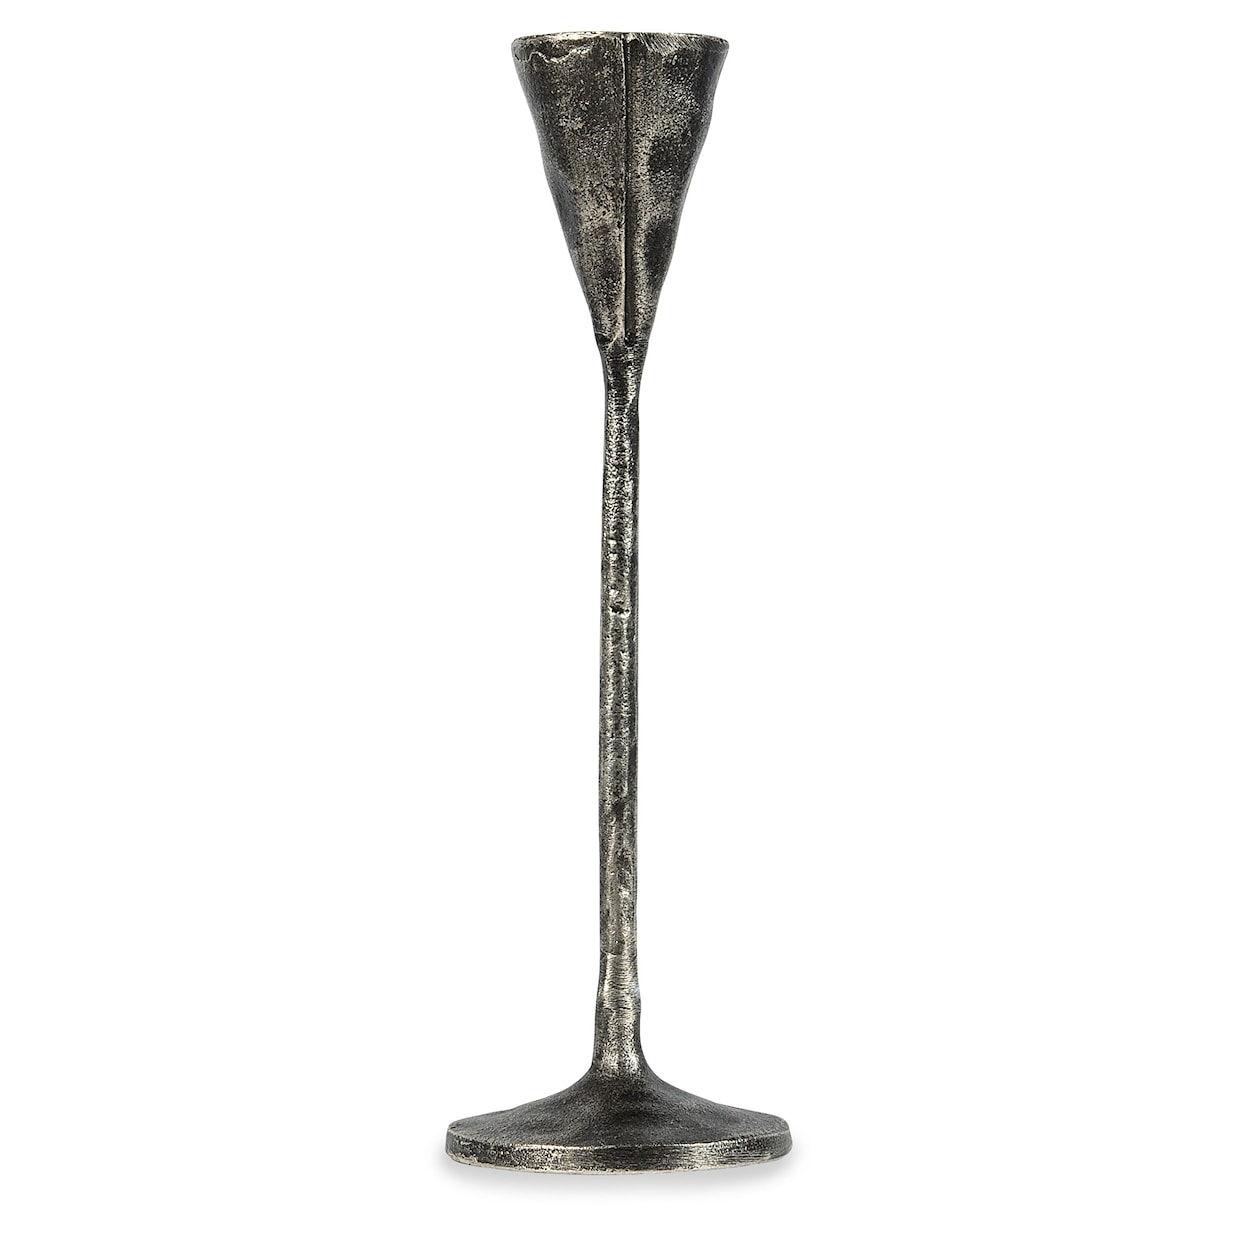 BOBO Intriguing Objects BOBO Intriguing Objects Antique Nickel Cone Candleholder - Small